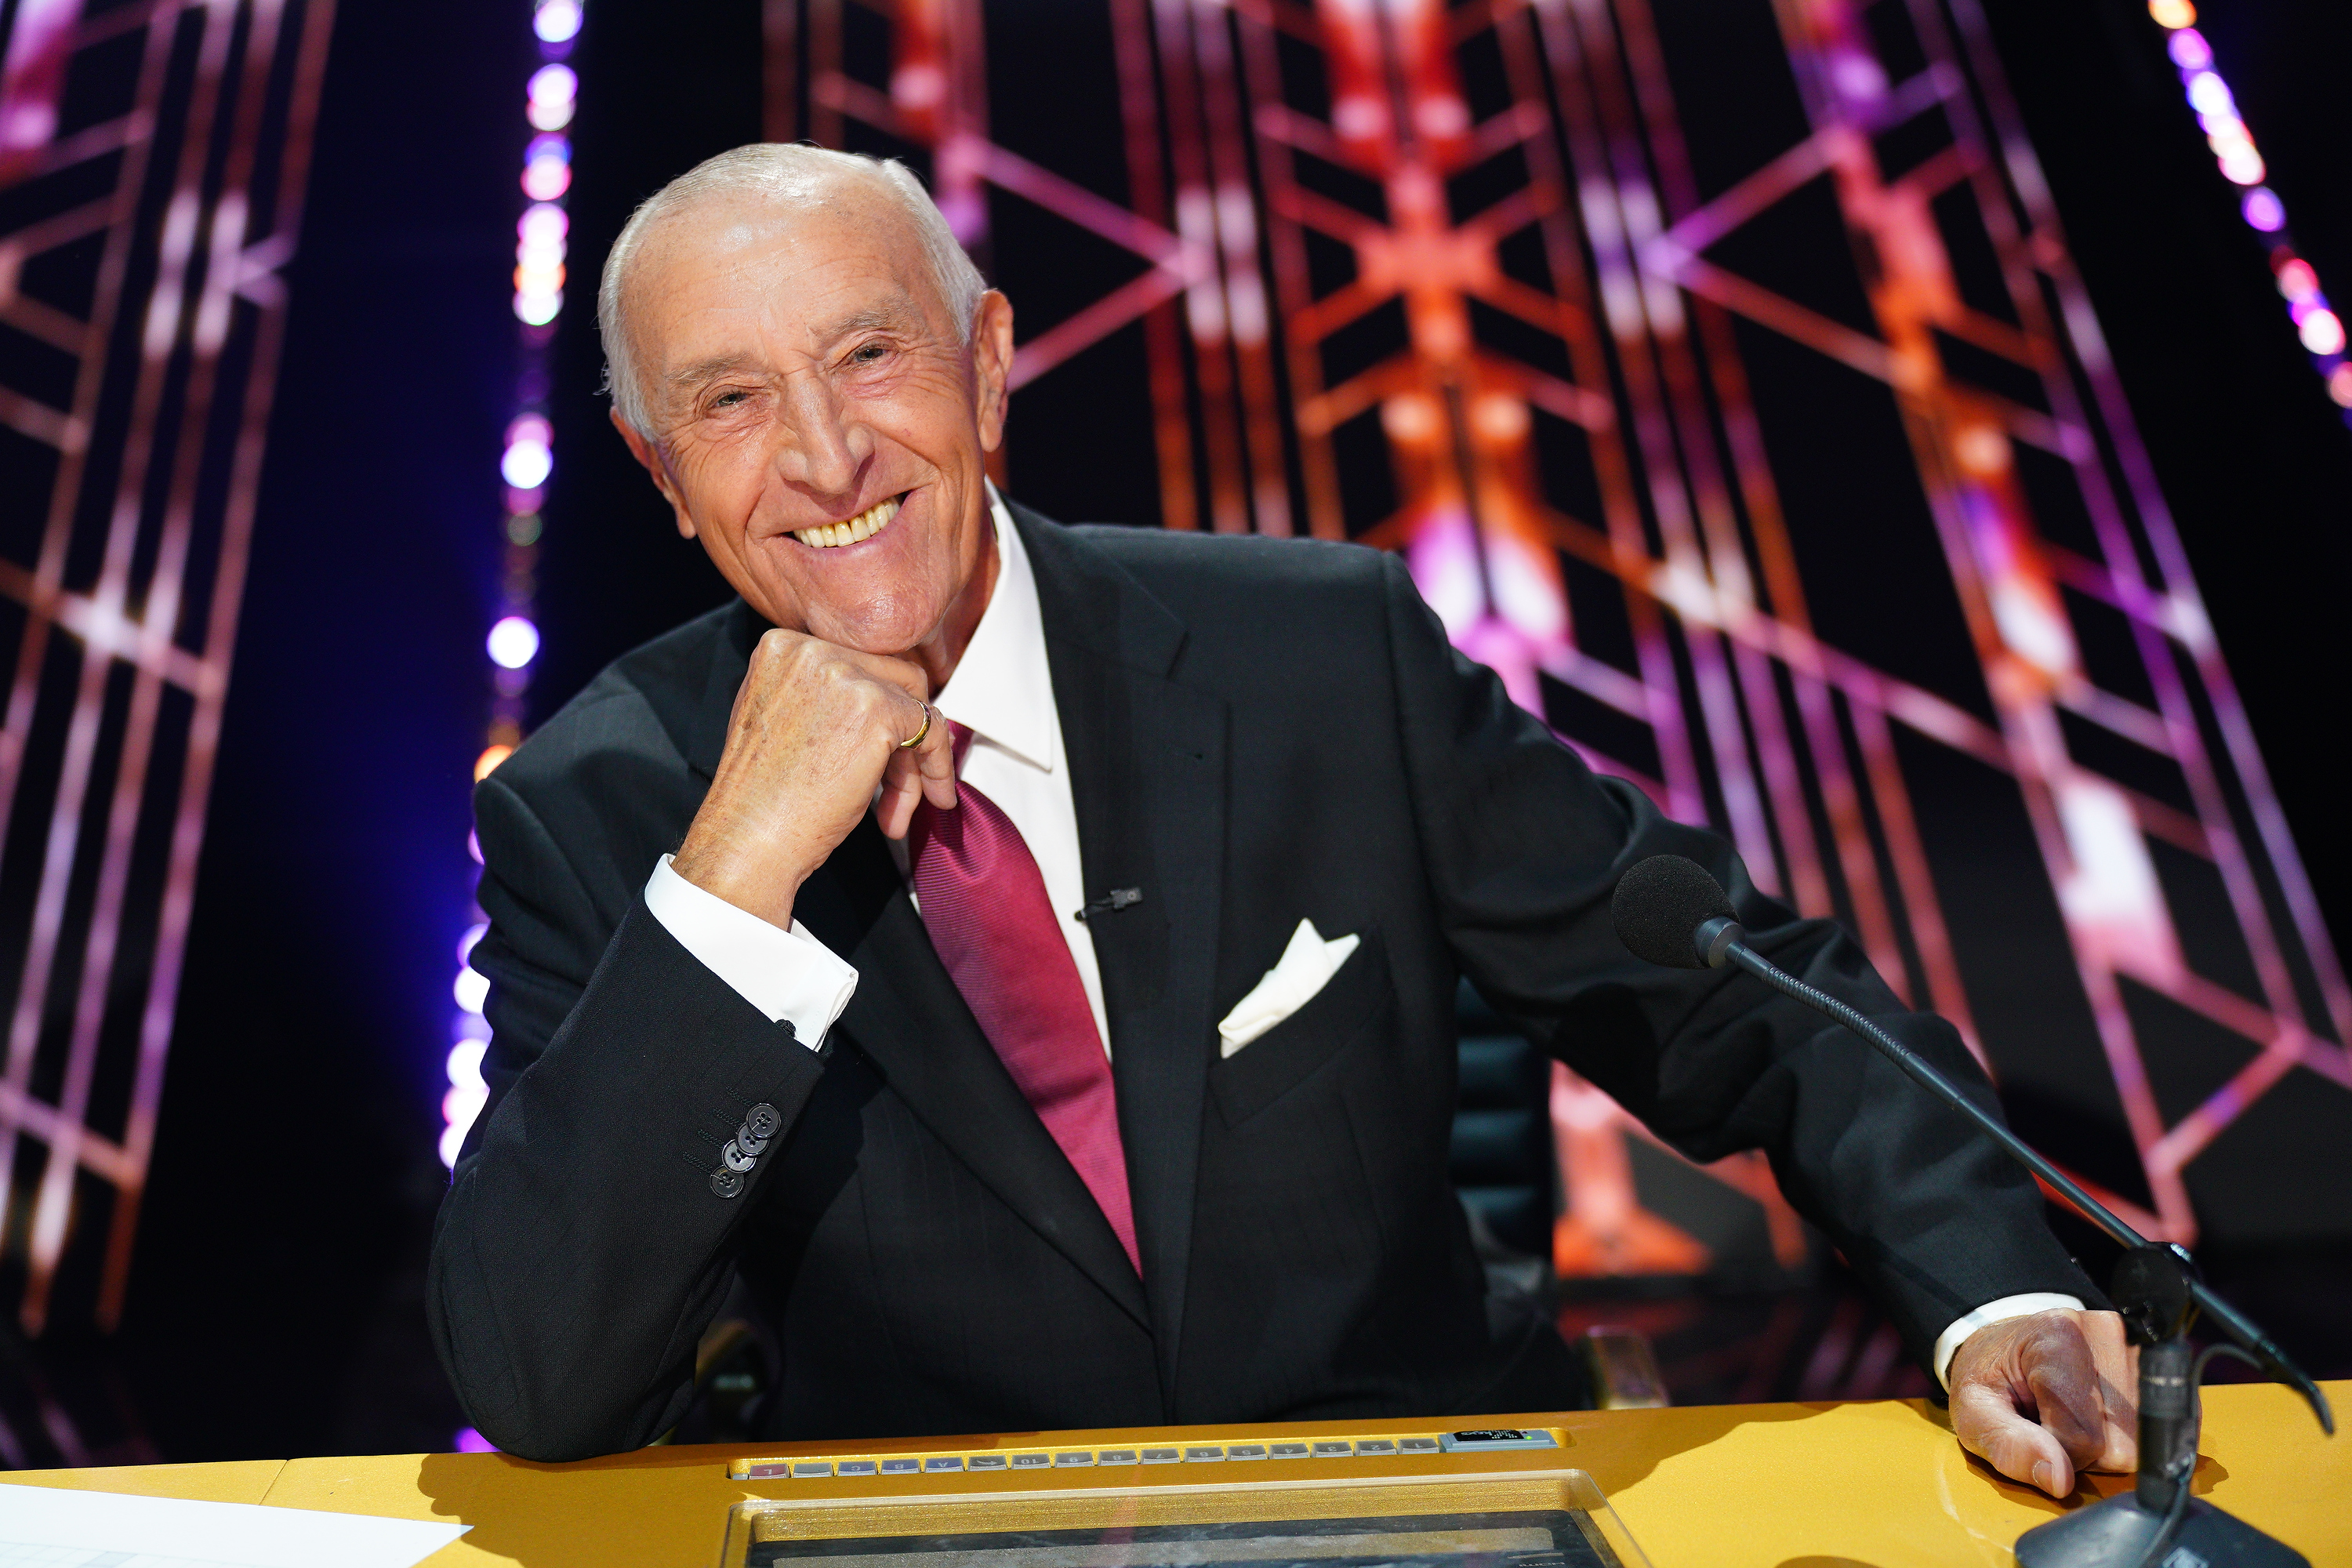 Len Goodman on the sets of "Dancing with the Stars" Season 30 on November 15, 2021 | Source: Getty Images